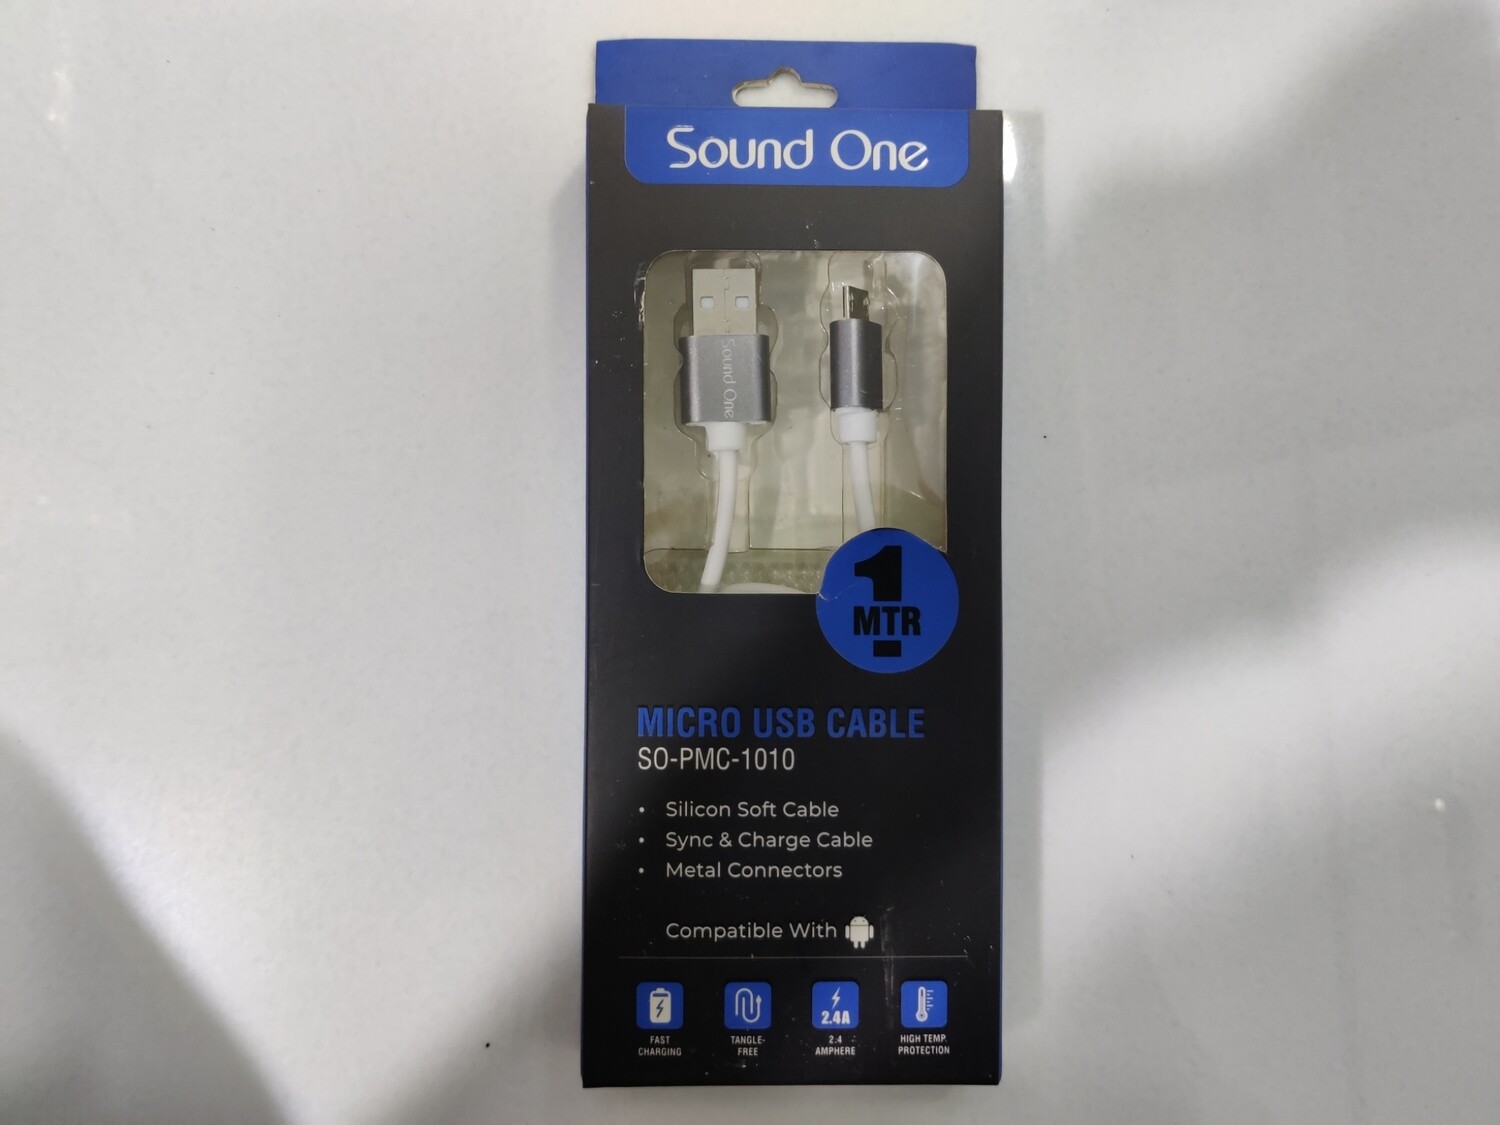 Sound One 1mtr Micro USB Cable